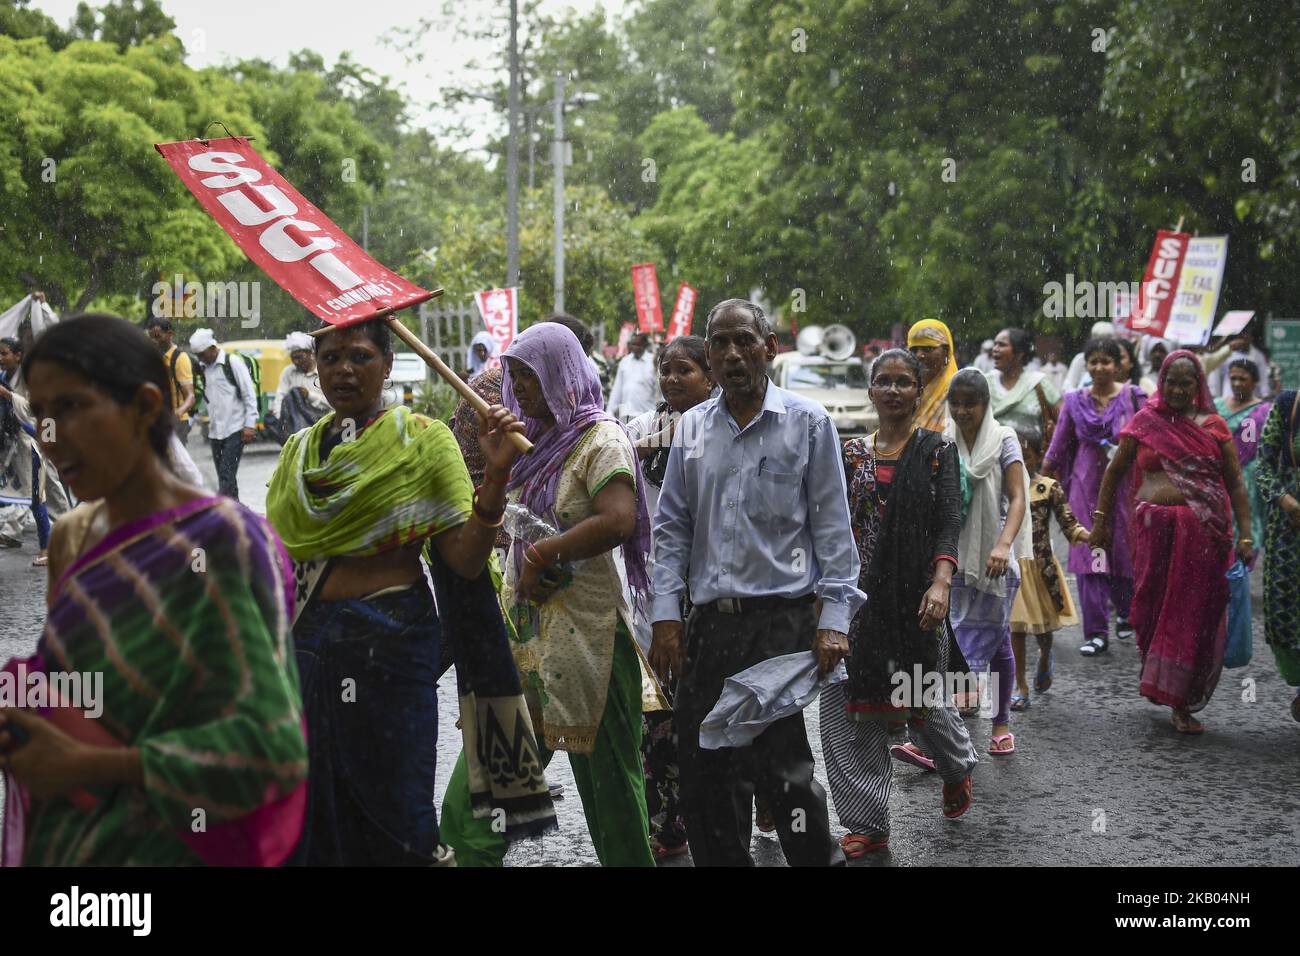 Students, teachers and activists of SUCI (C) participate in a rally from Mandi House to Parliament Street to protest against the 'No Detention Policy' in the schools on July 18, 2018 in New Delhi, India. As per No detention policy under the Right to Education Act no student can be failed or expelled from school till Class 8. (Photo by Indraneel Chowdhury/NurPhoto) Stock Photo